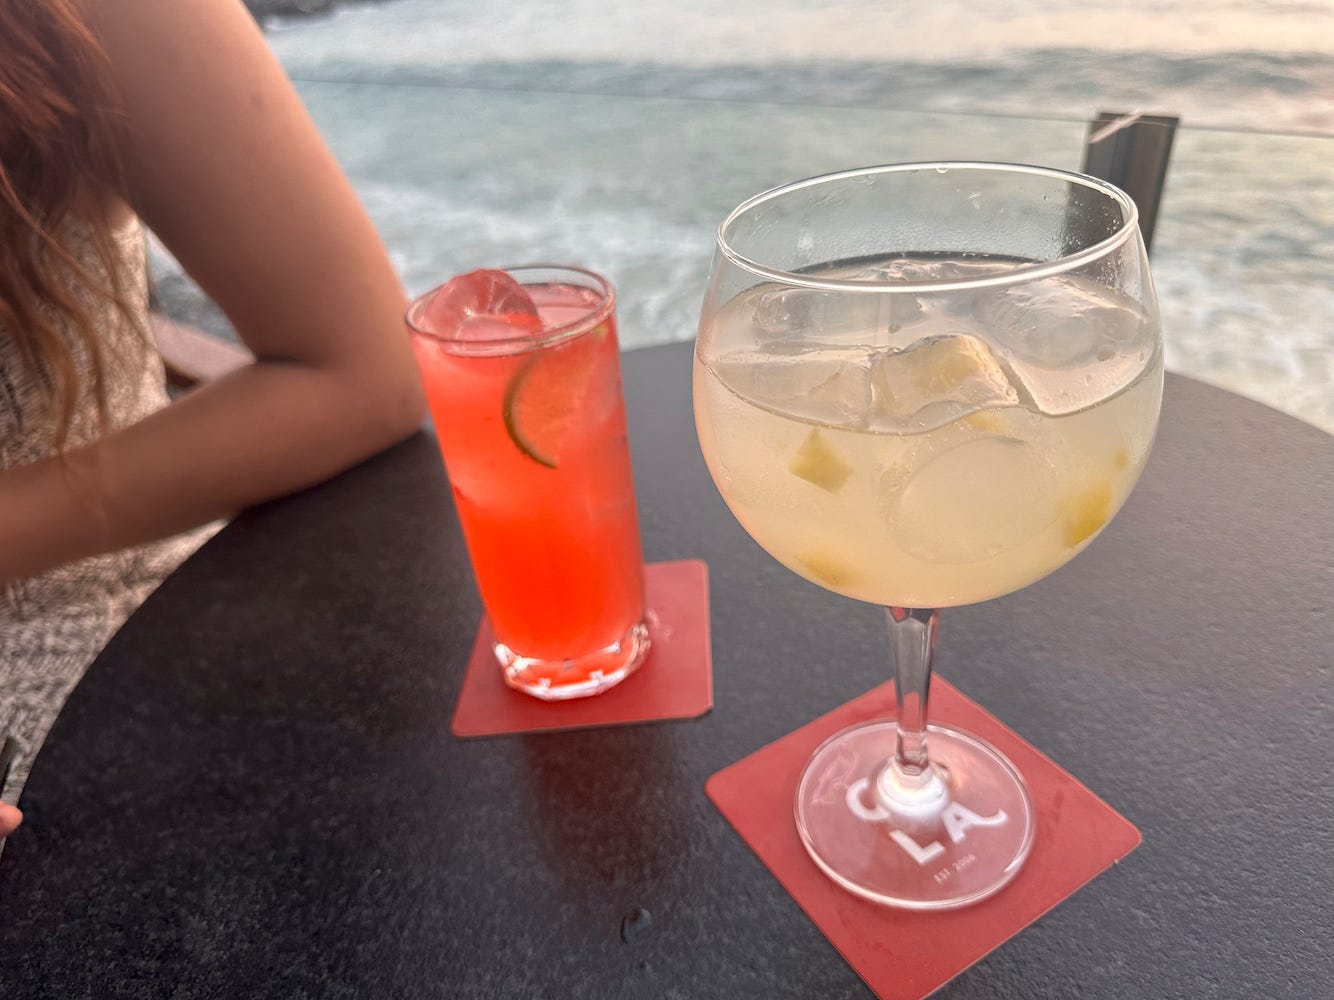 Gin and Pisco cocktails with a view of the beach at Cala